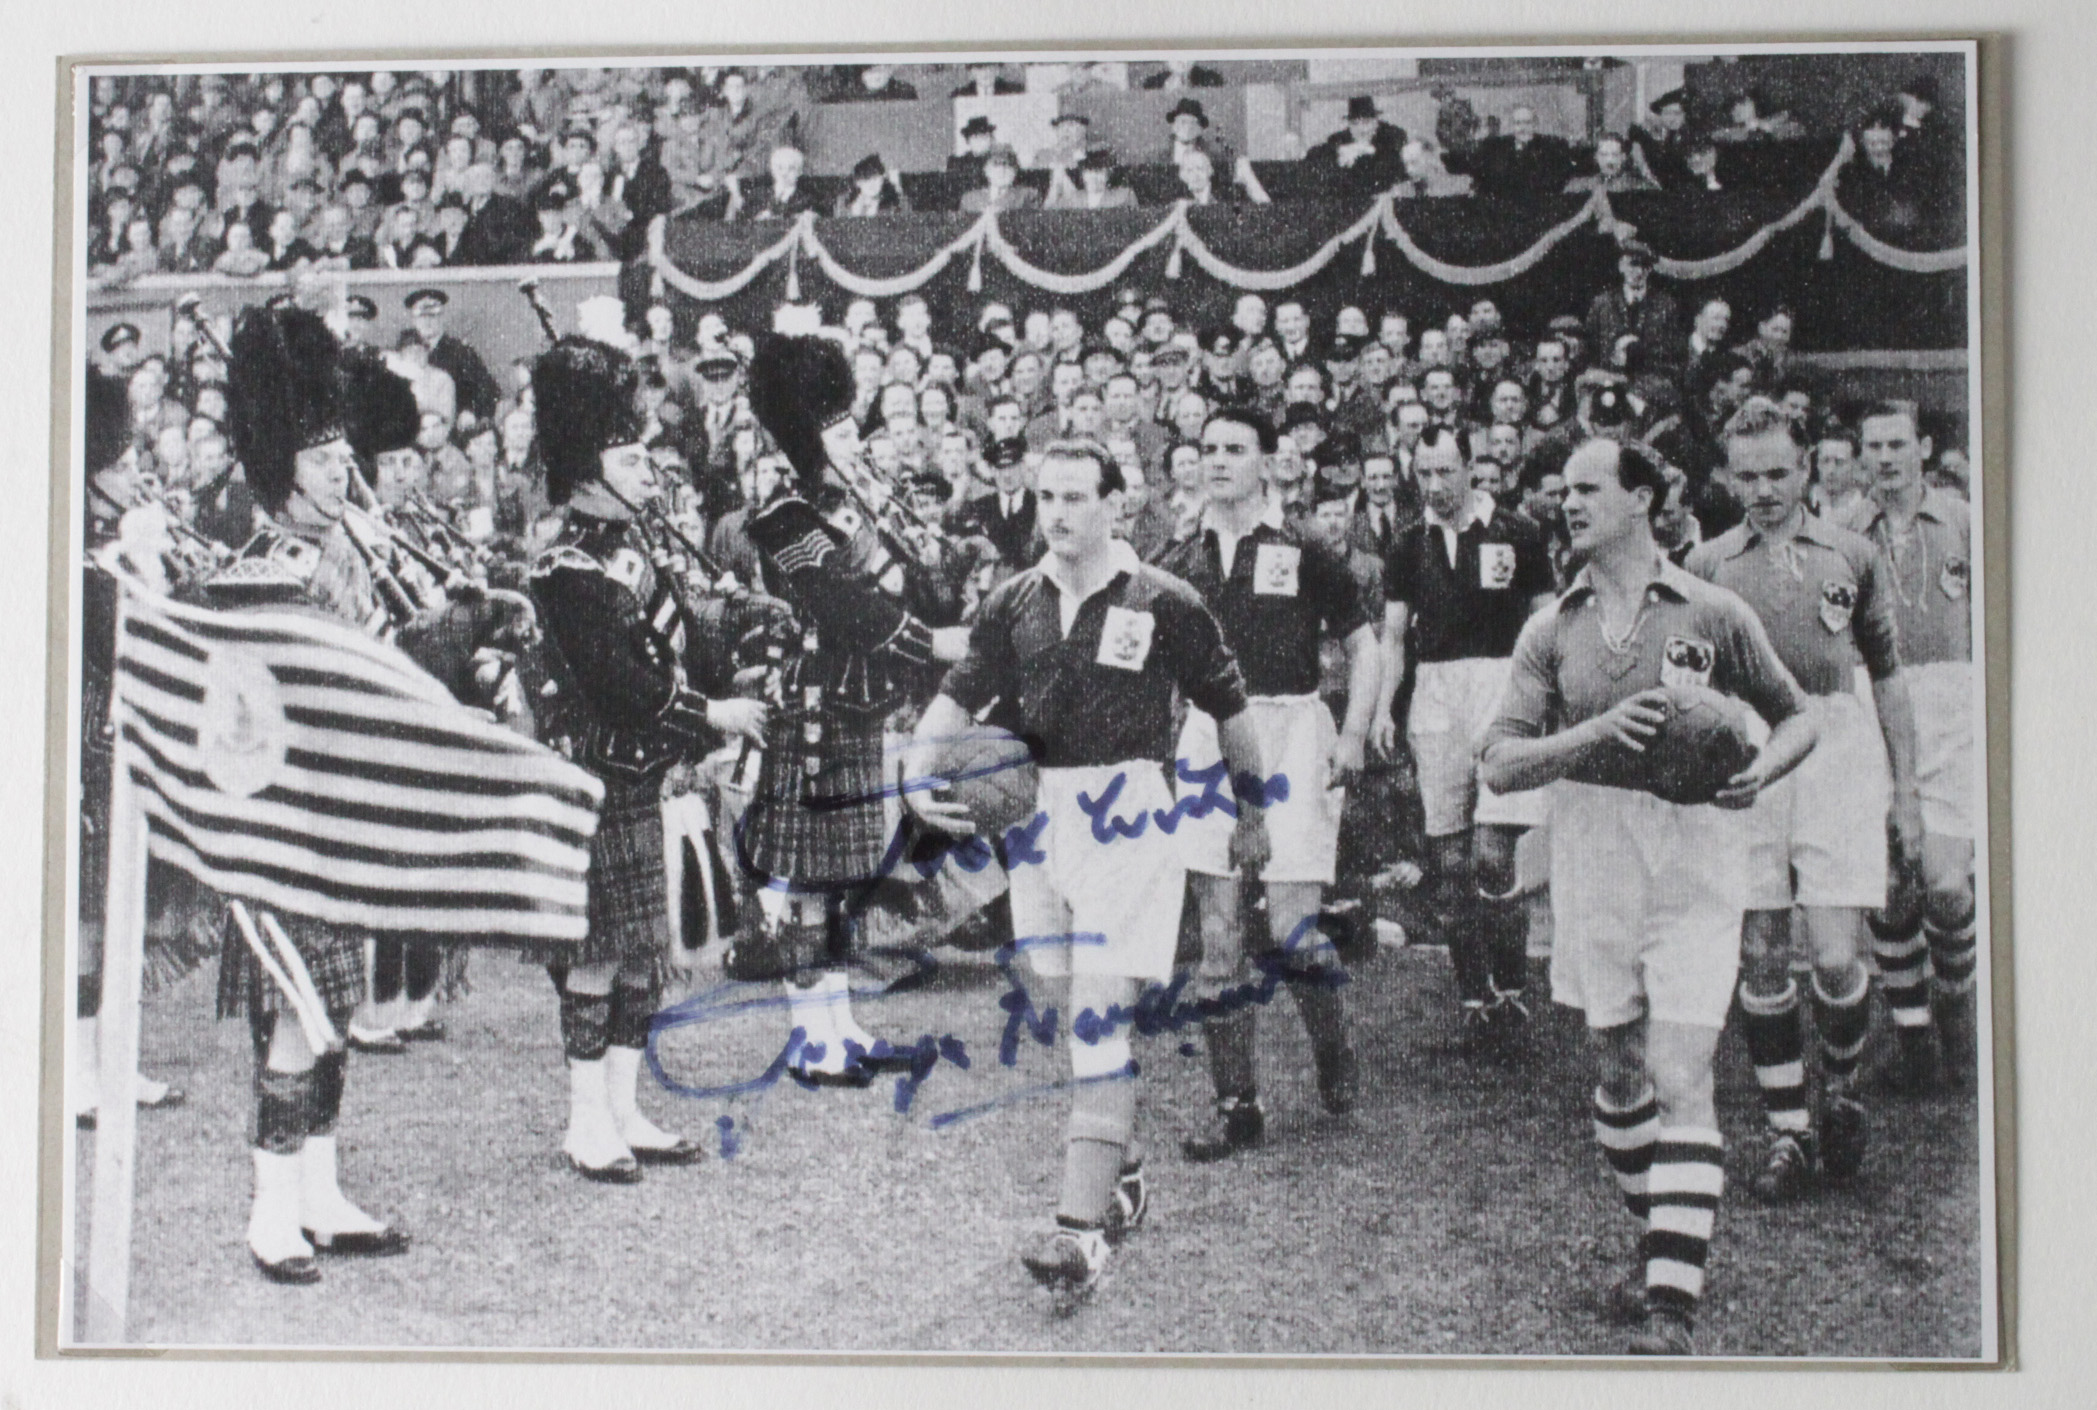 Great Britain v FIFA match played 1947 at Hampden park, b & w 8"x5" print of George Hardwick leading